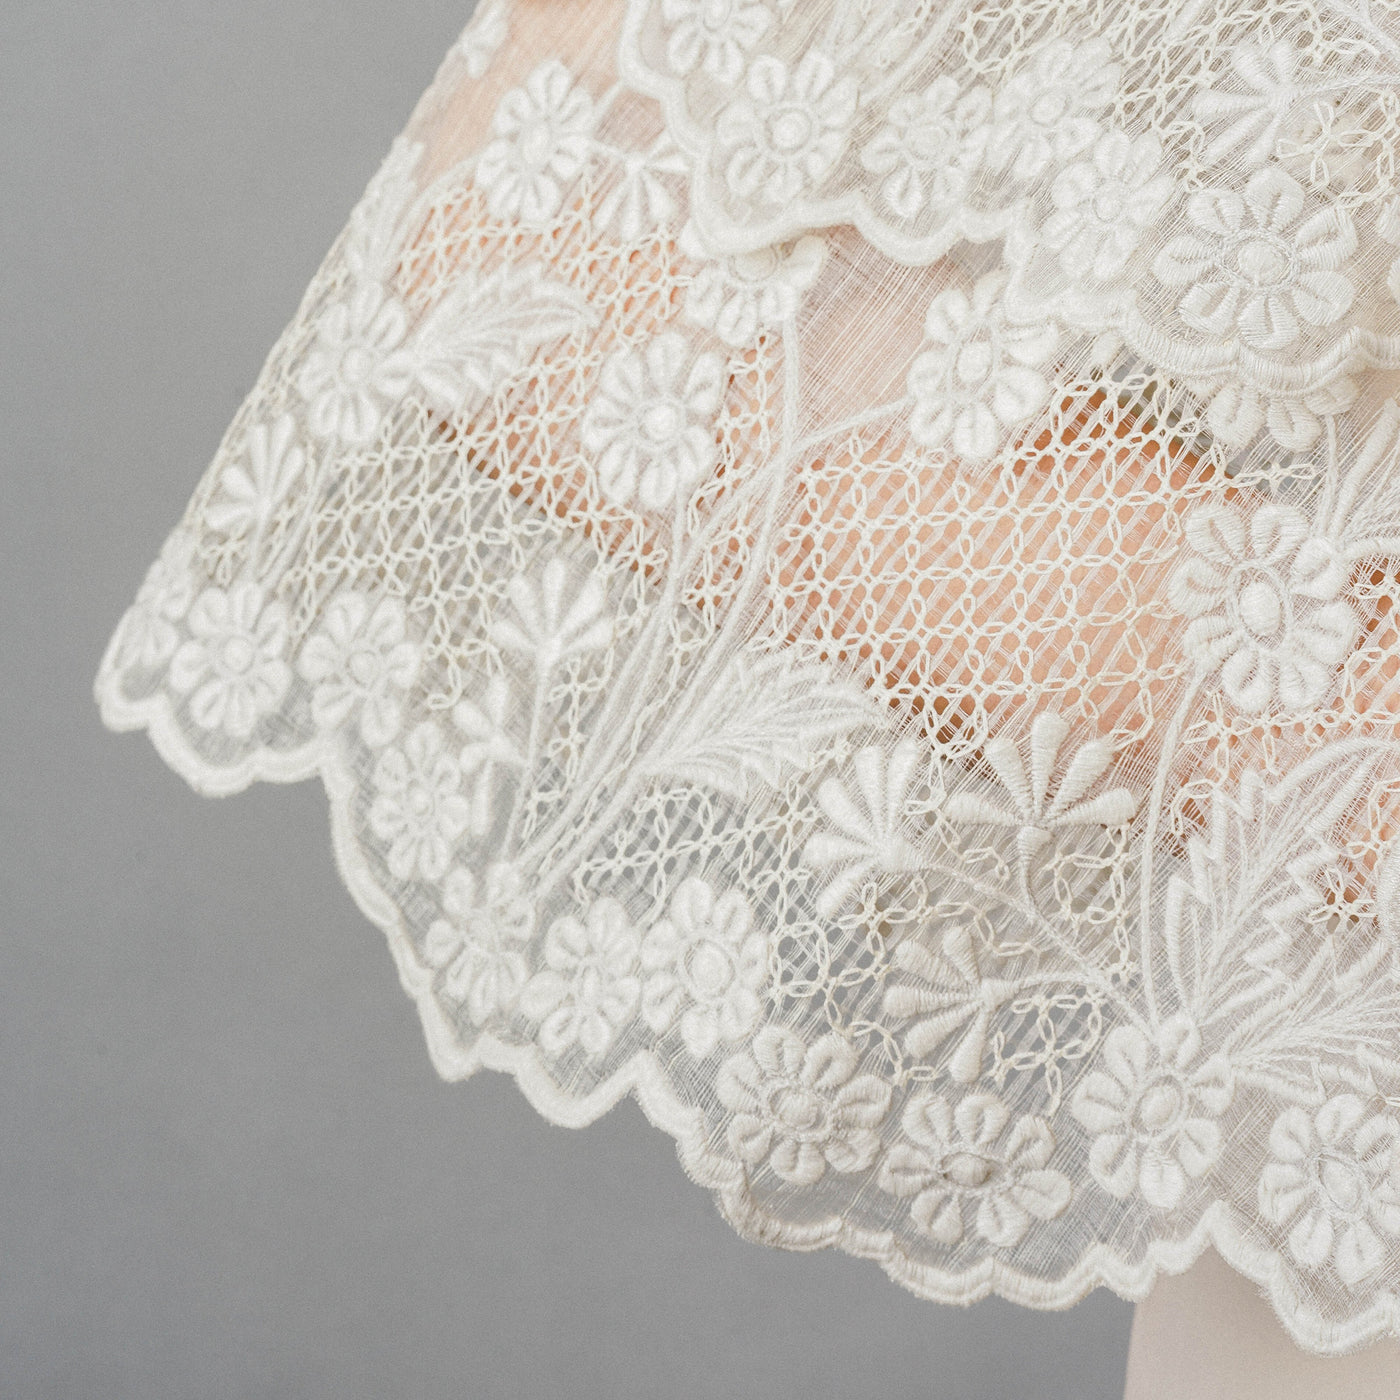 Traditional Embroideries